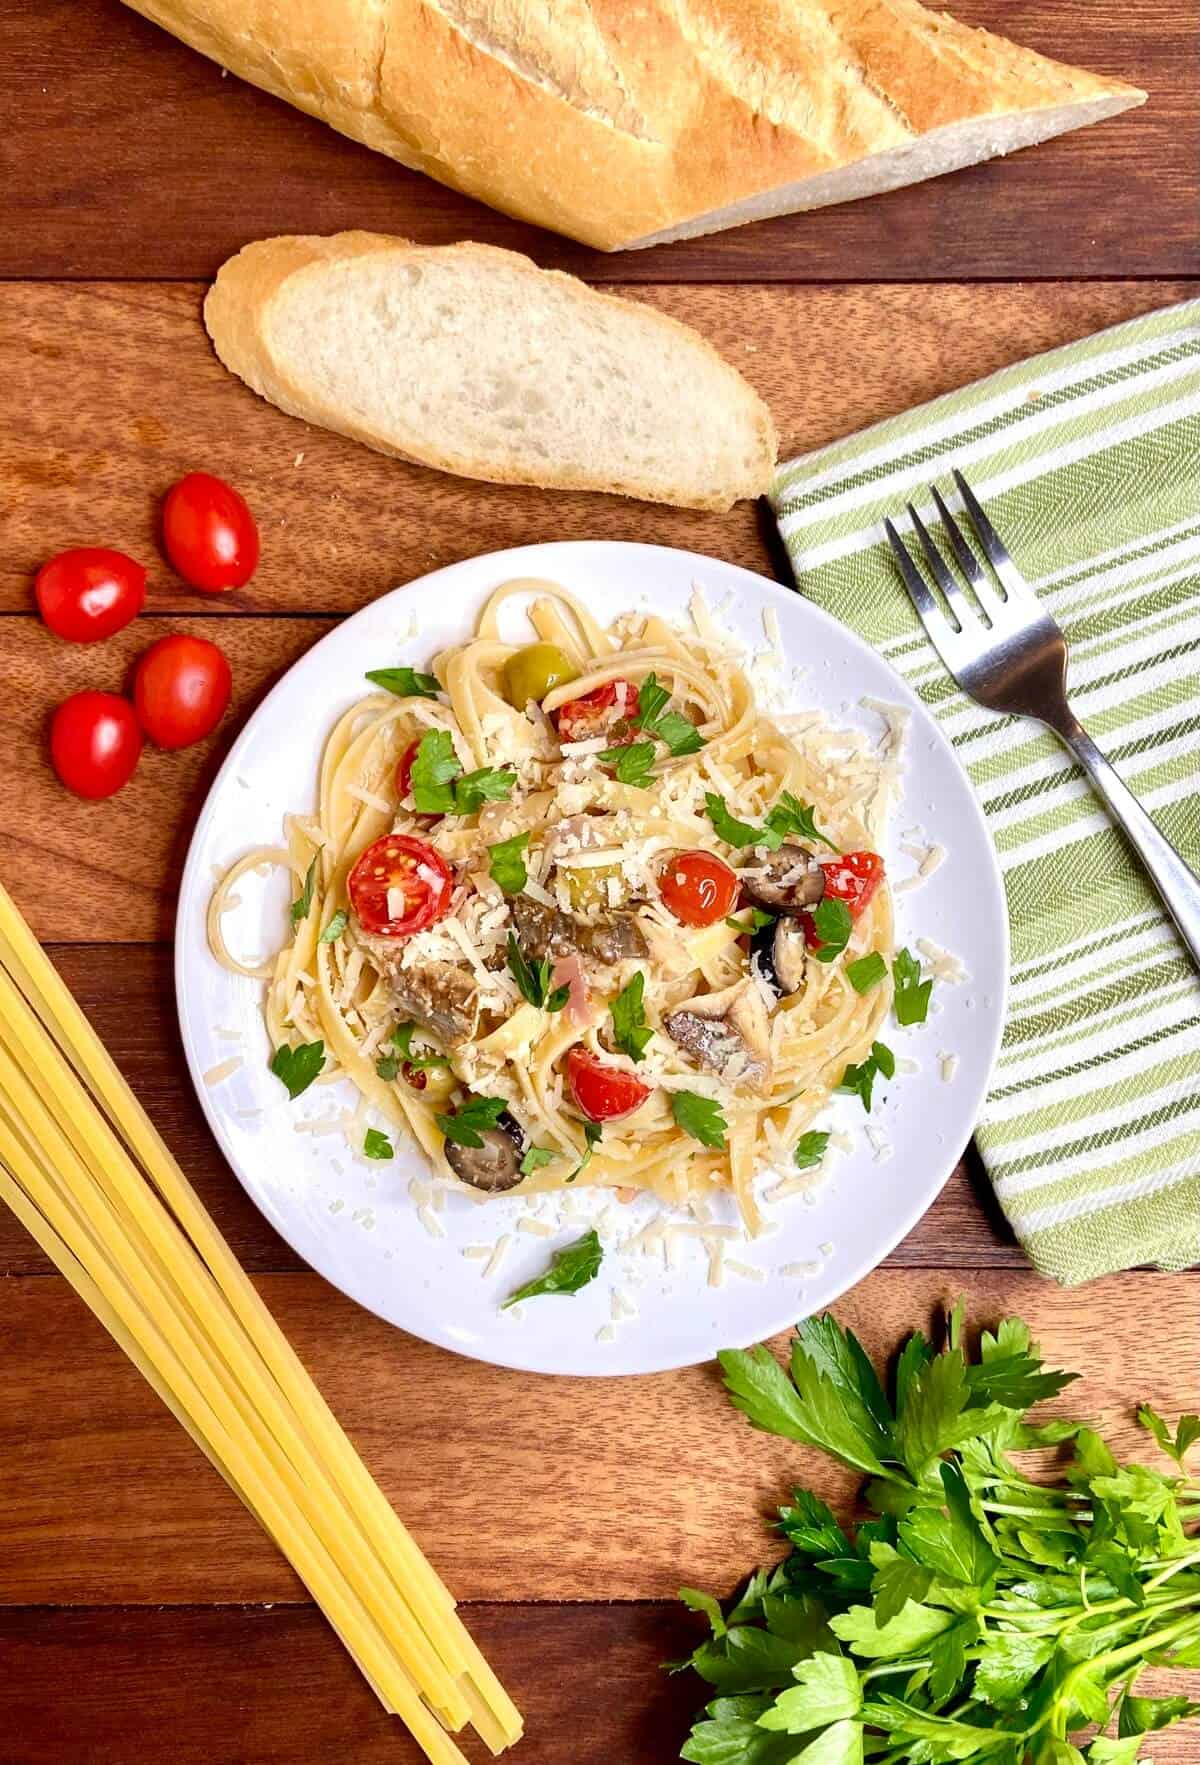 Pasta served on a plate, with slices of baguette and cherry tomatoes on a wood table.